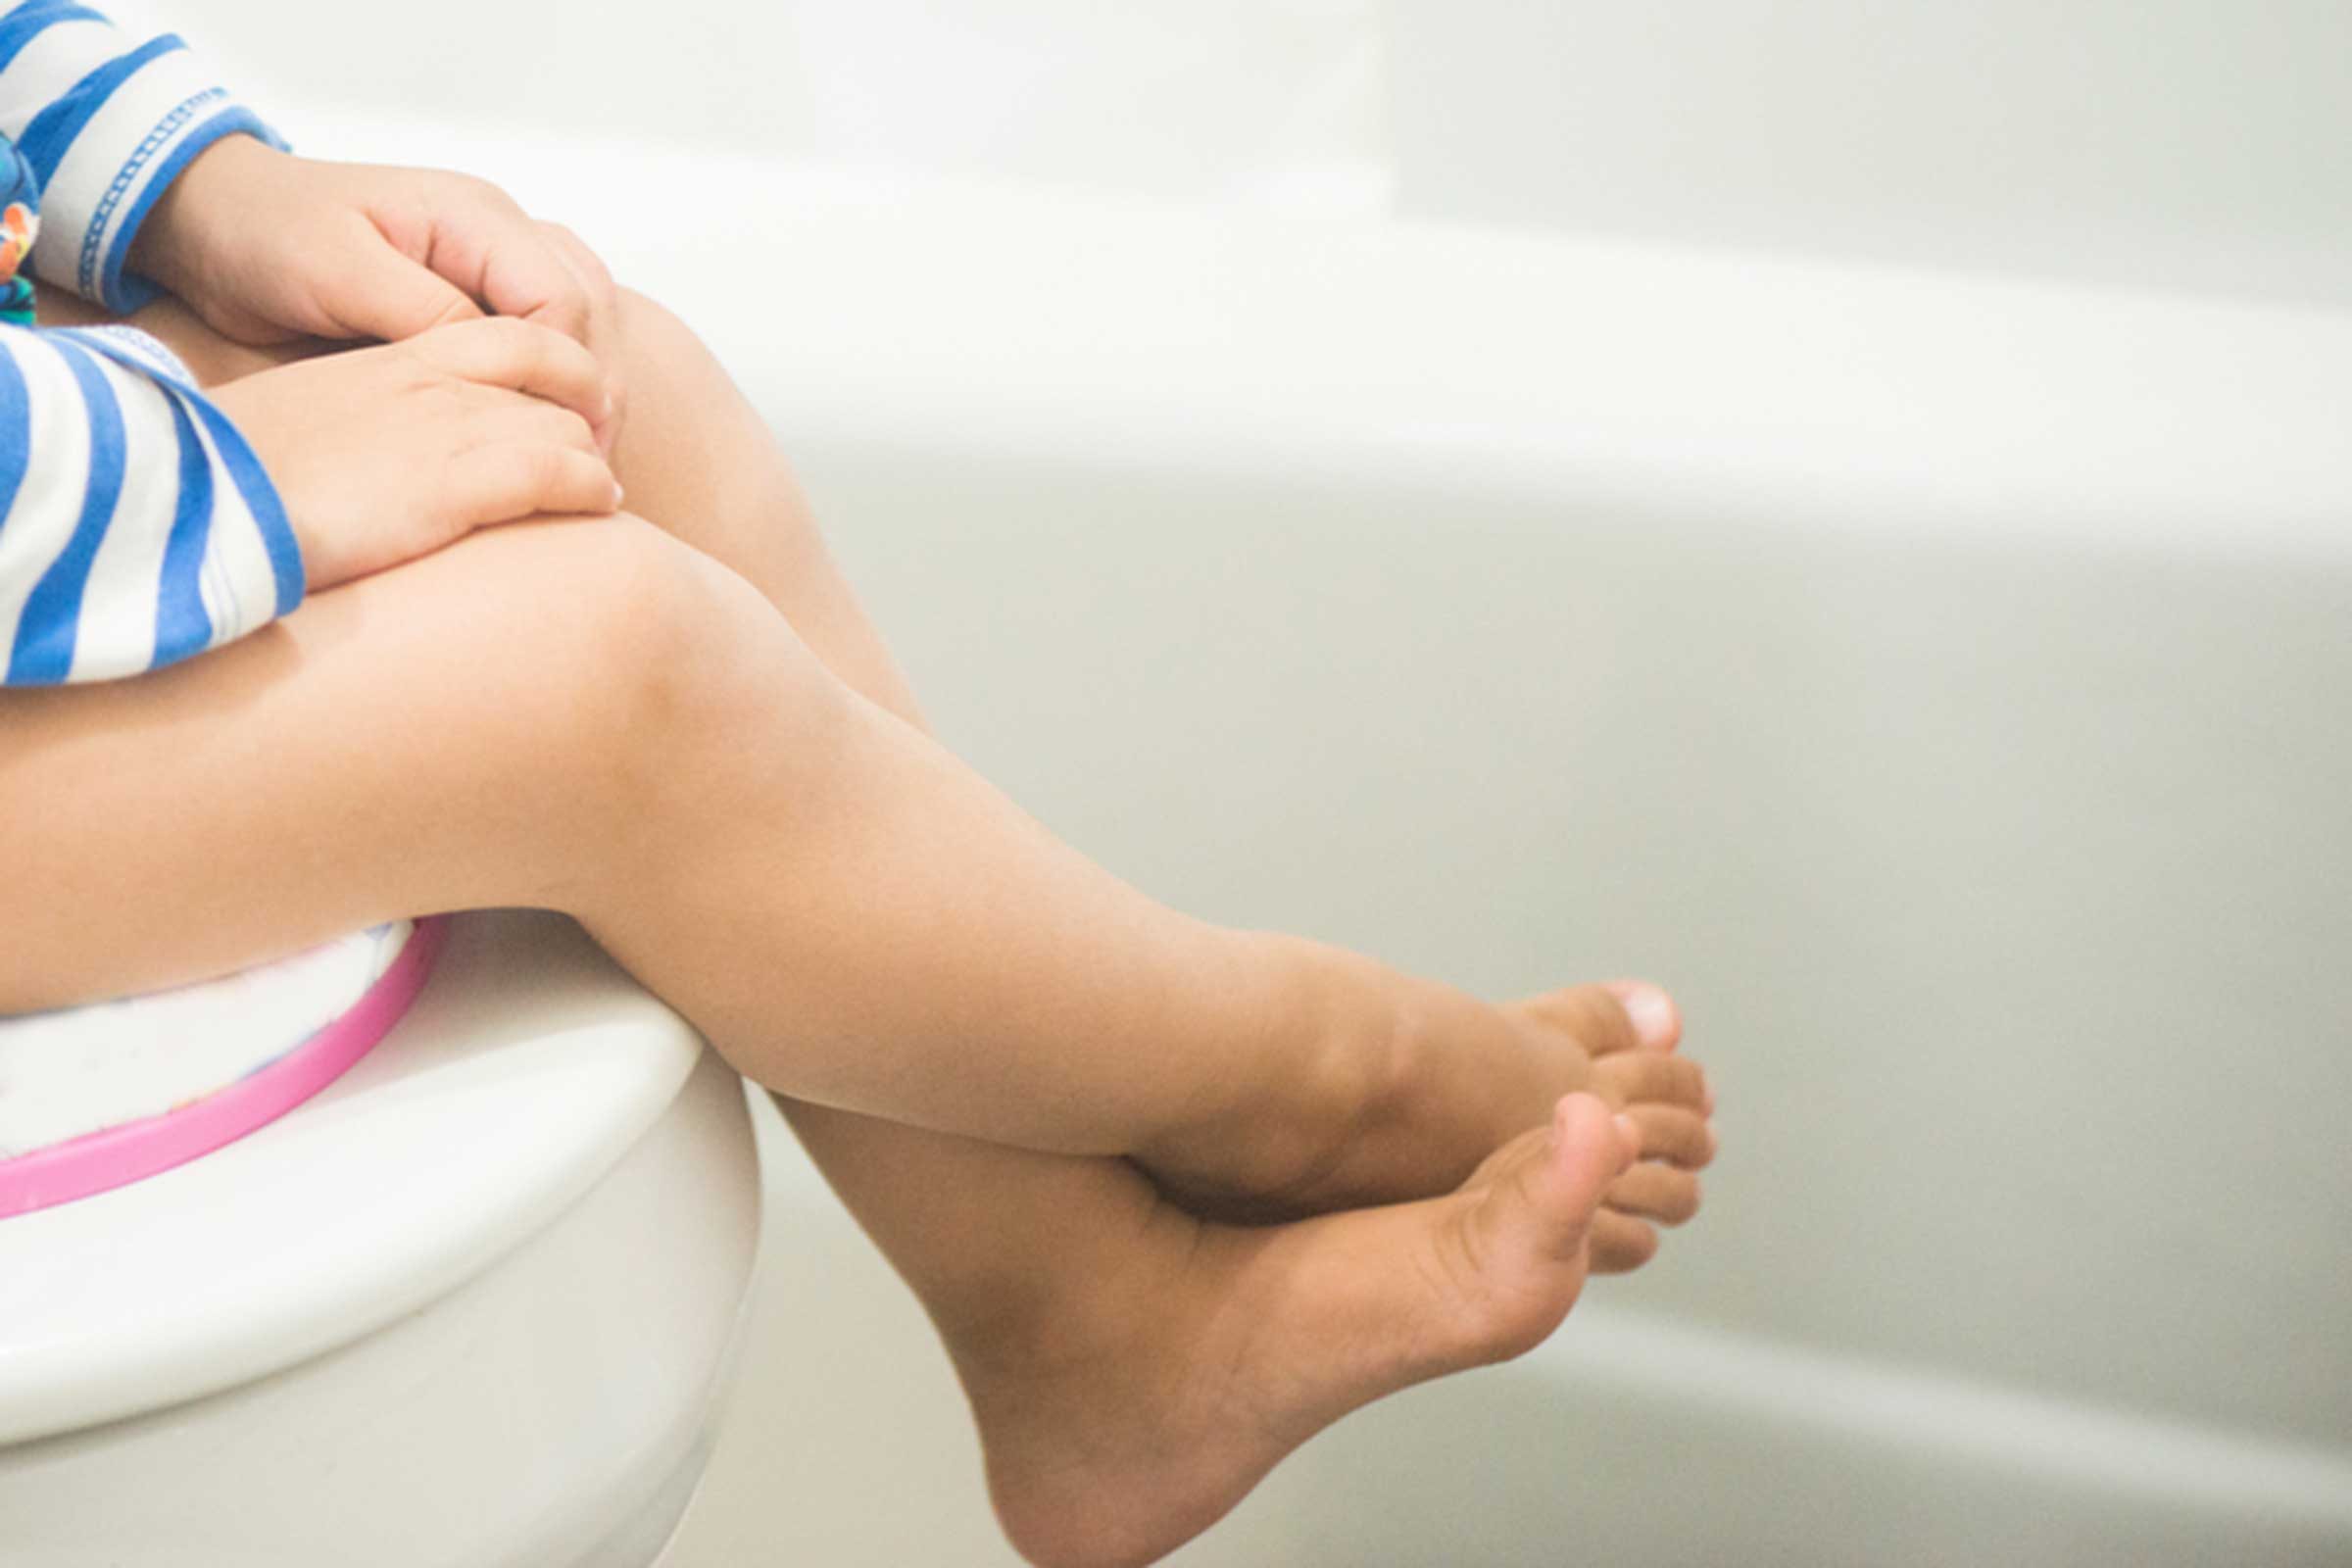 how to relieve constipation in children | reader's digest